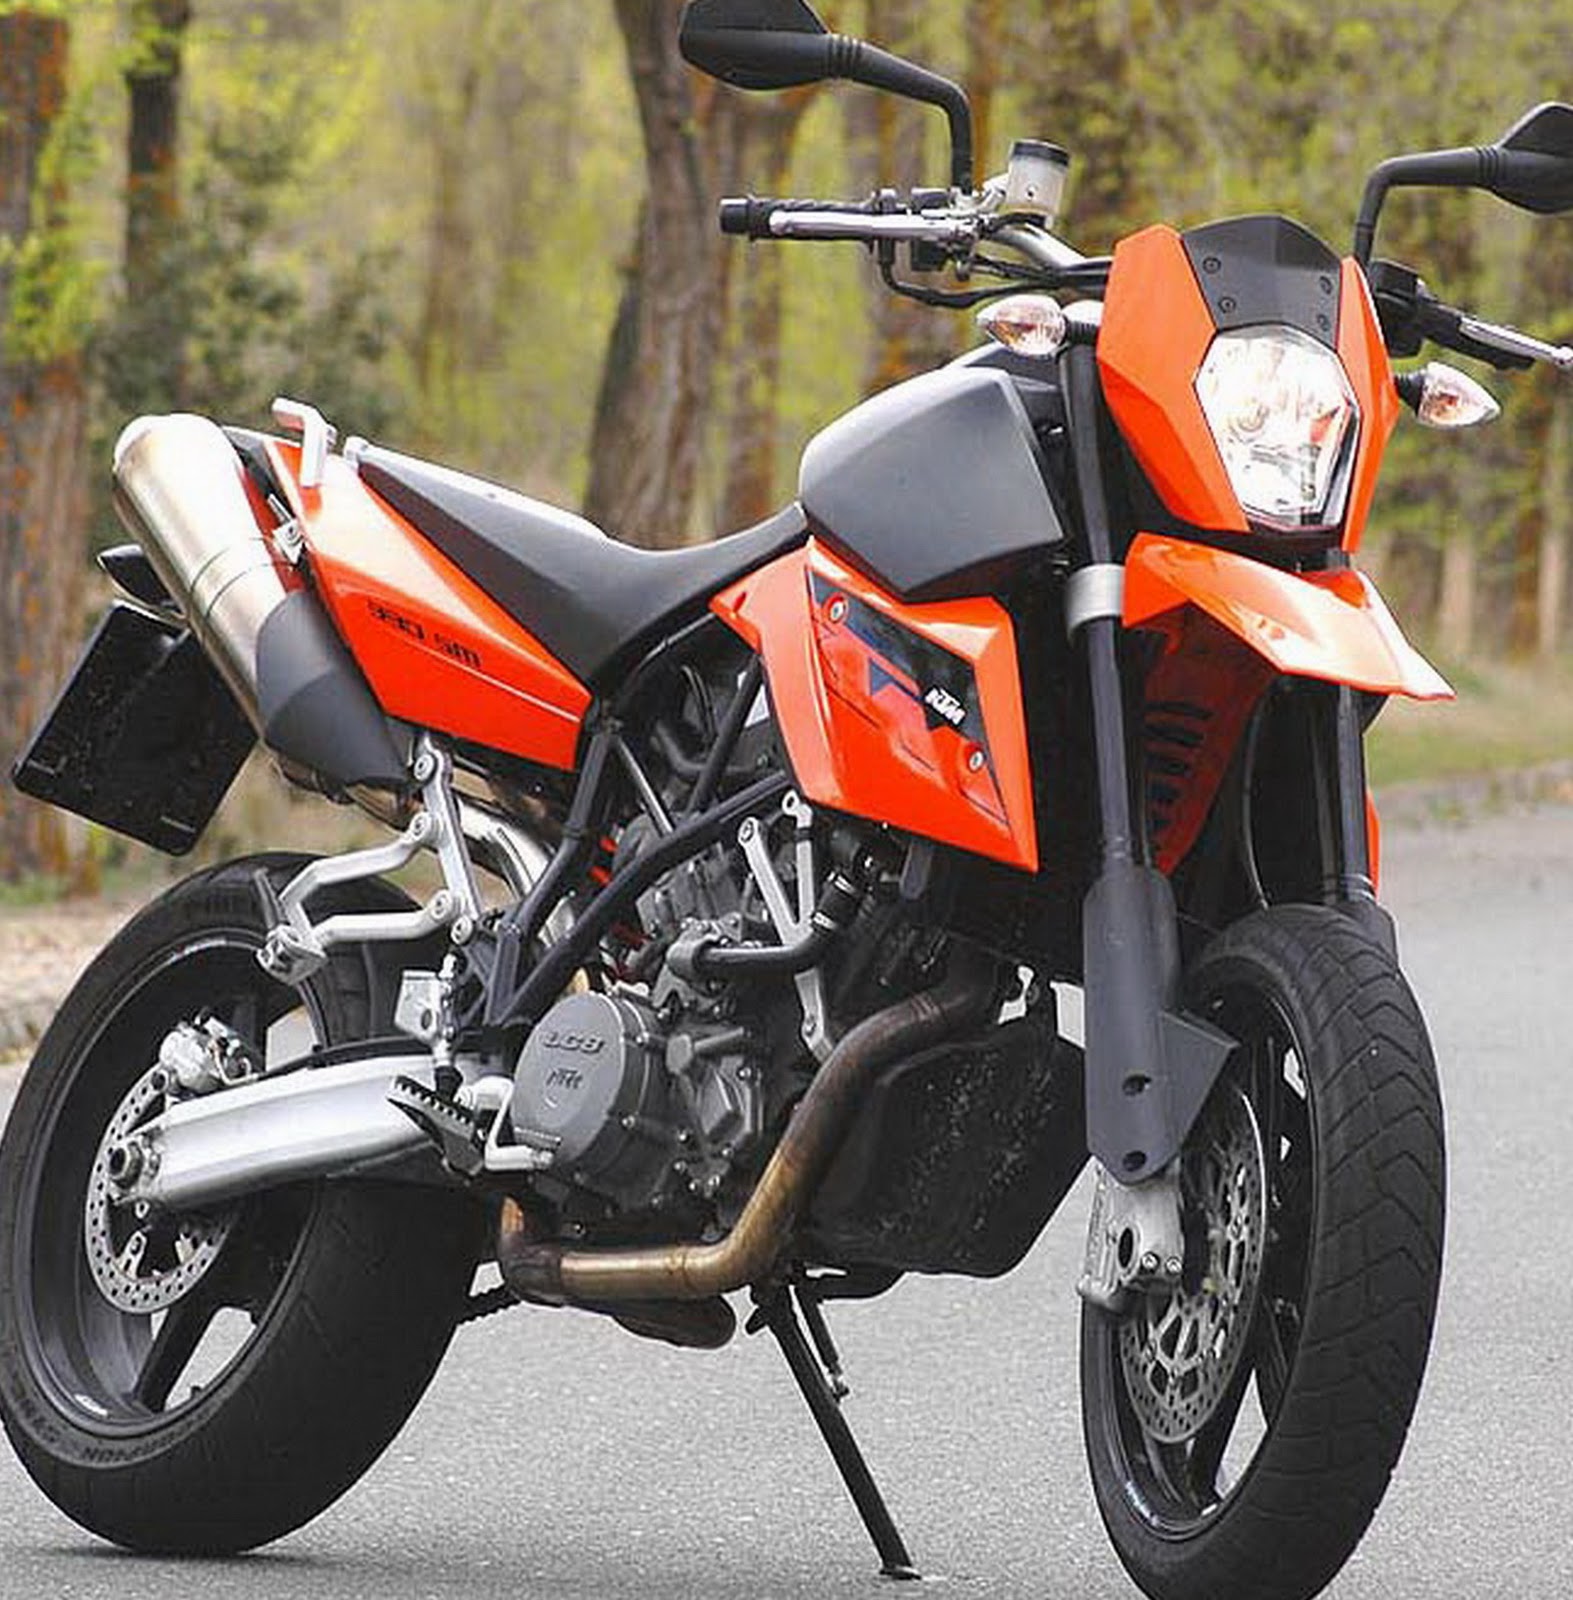 new-motorcycle-custom-modification-review-and-specs-ktm-690-smc-r